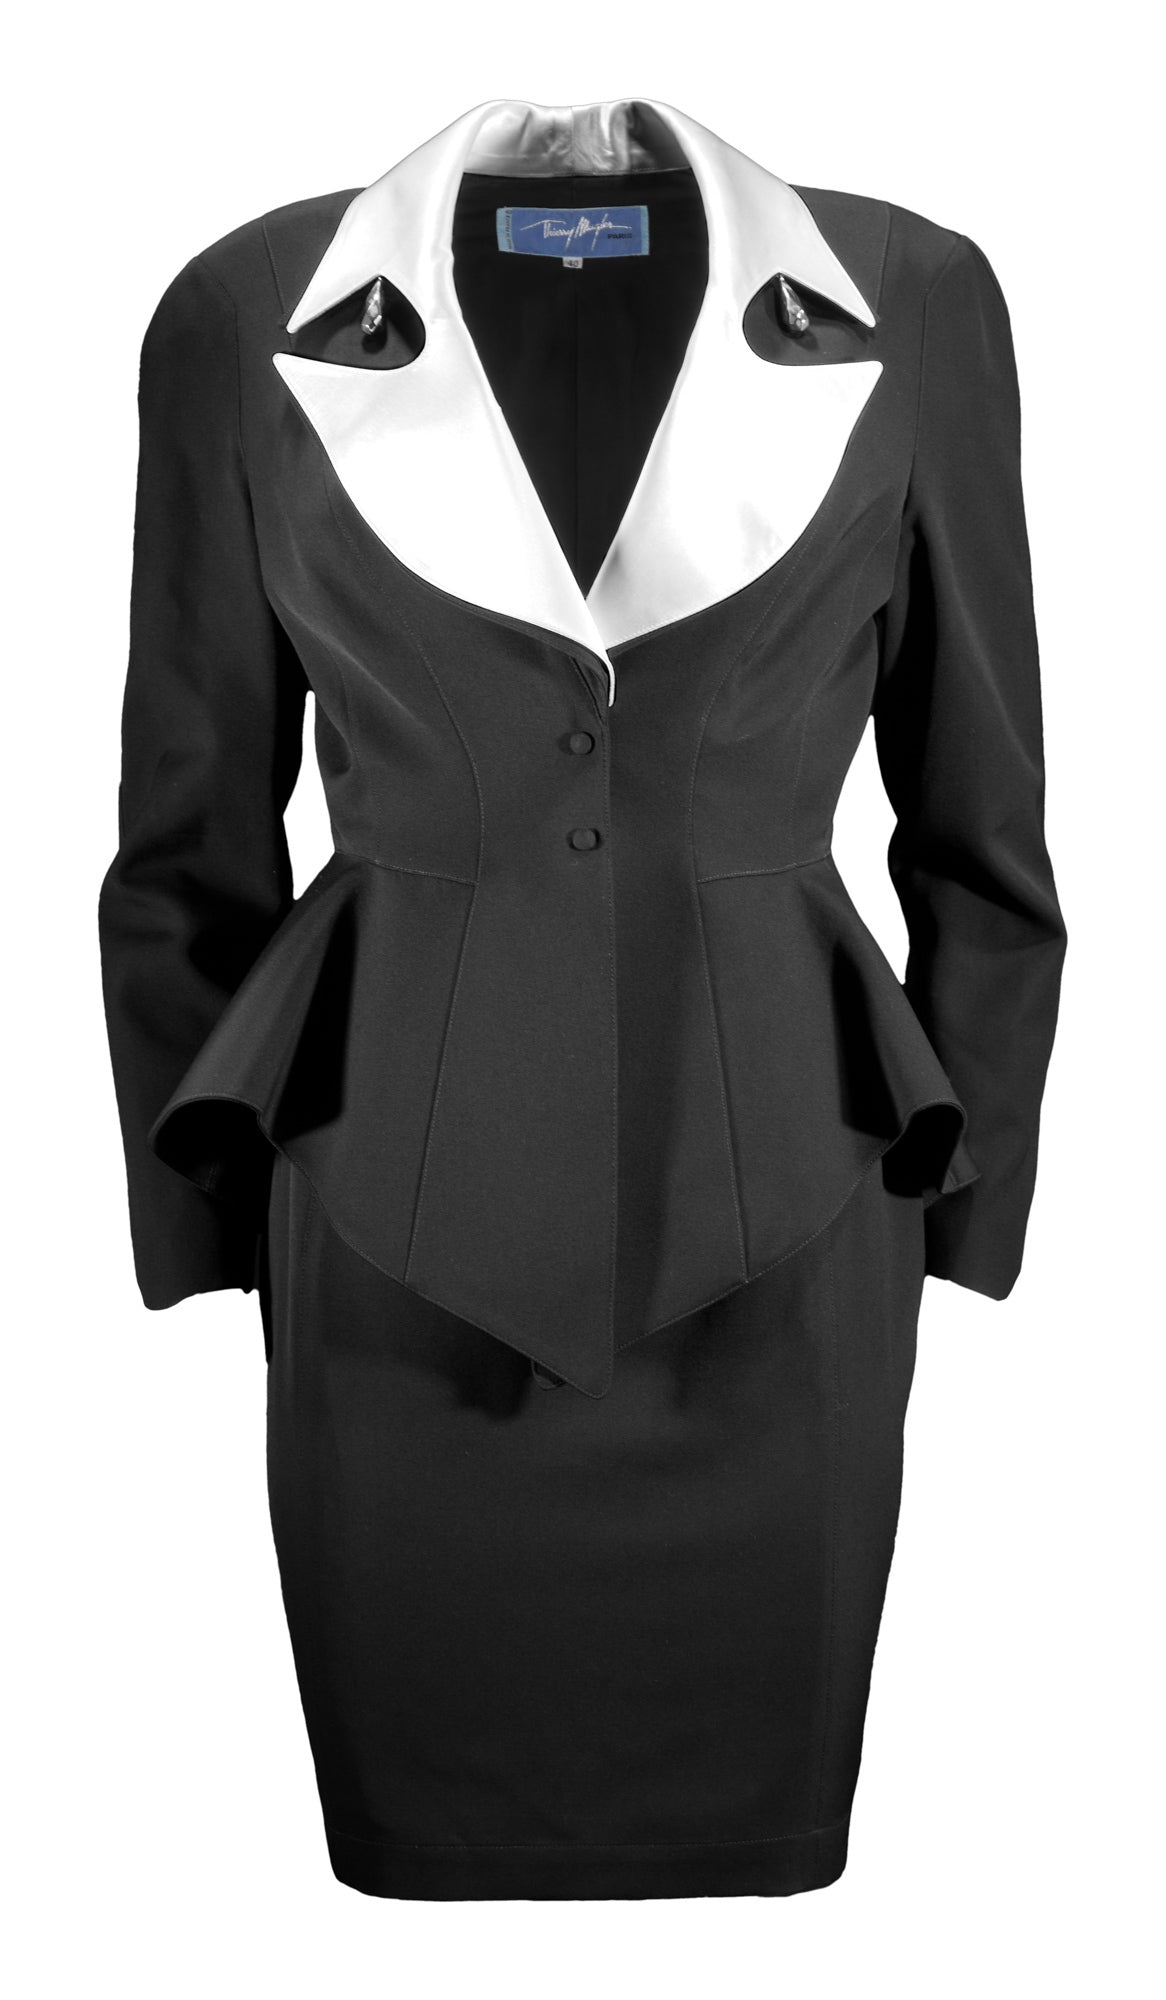  Thierry Mugler F/W 1992 Archival Black Skirt Suit with White Satin Notched Lapels FRONT 1/10